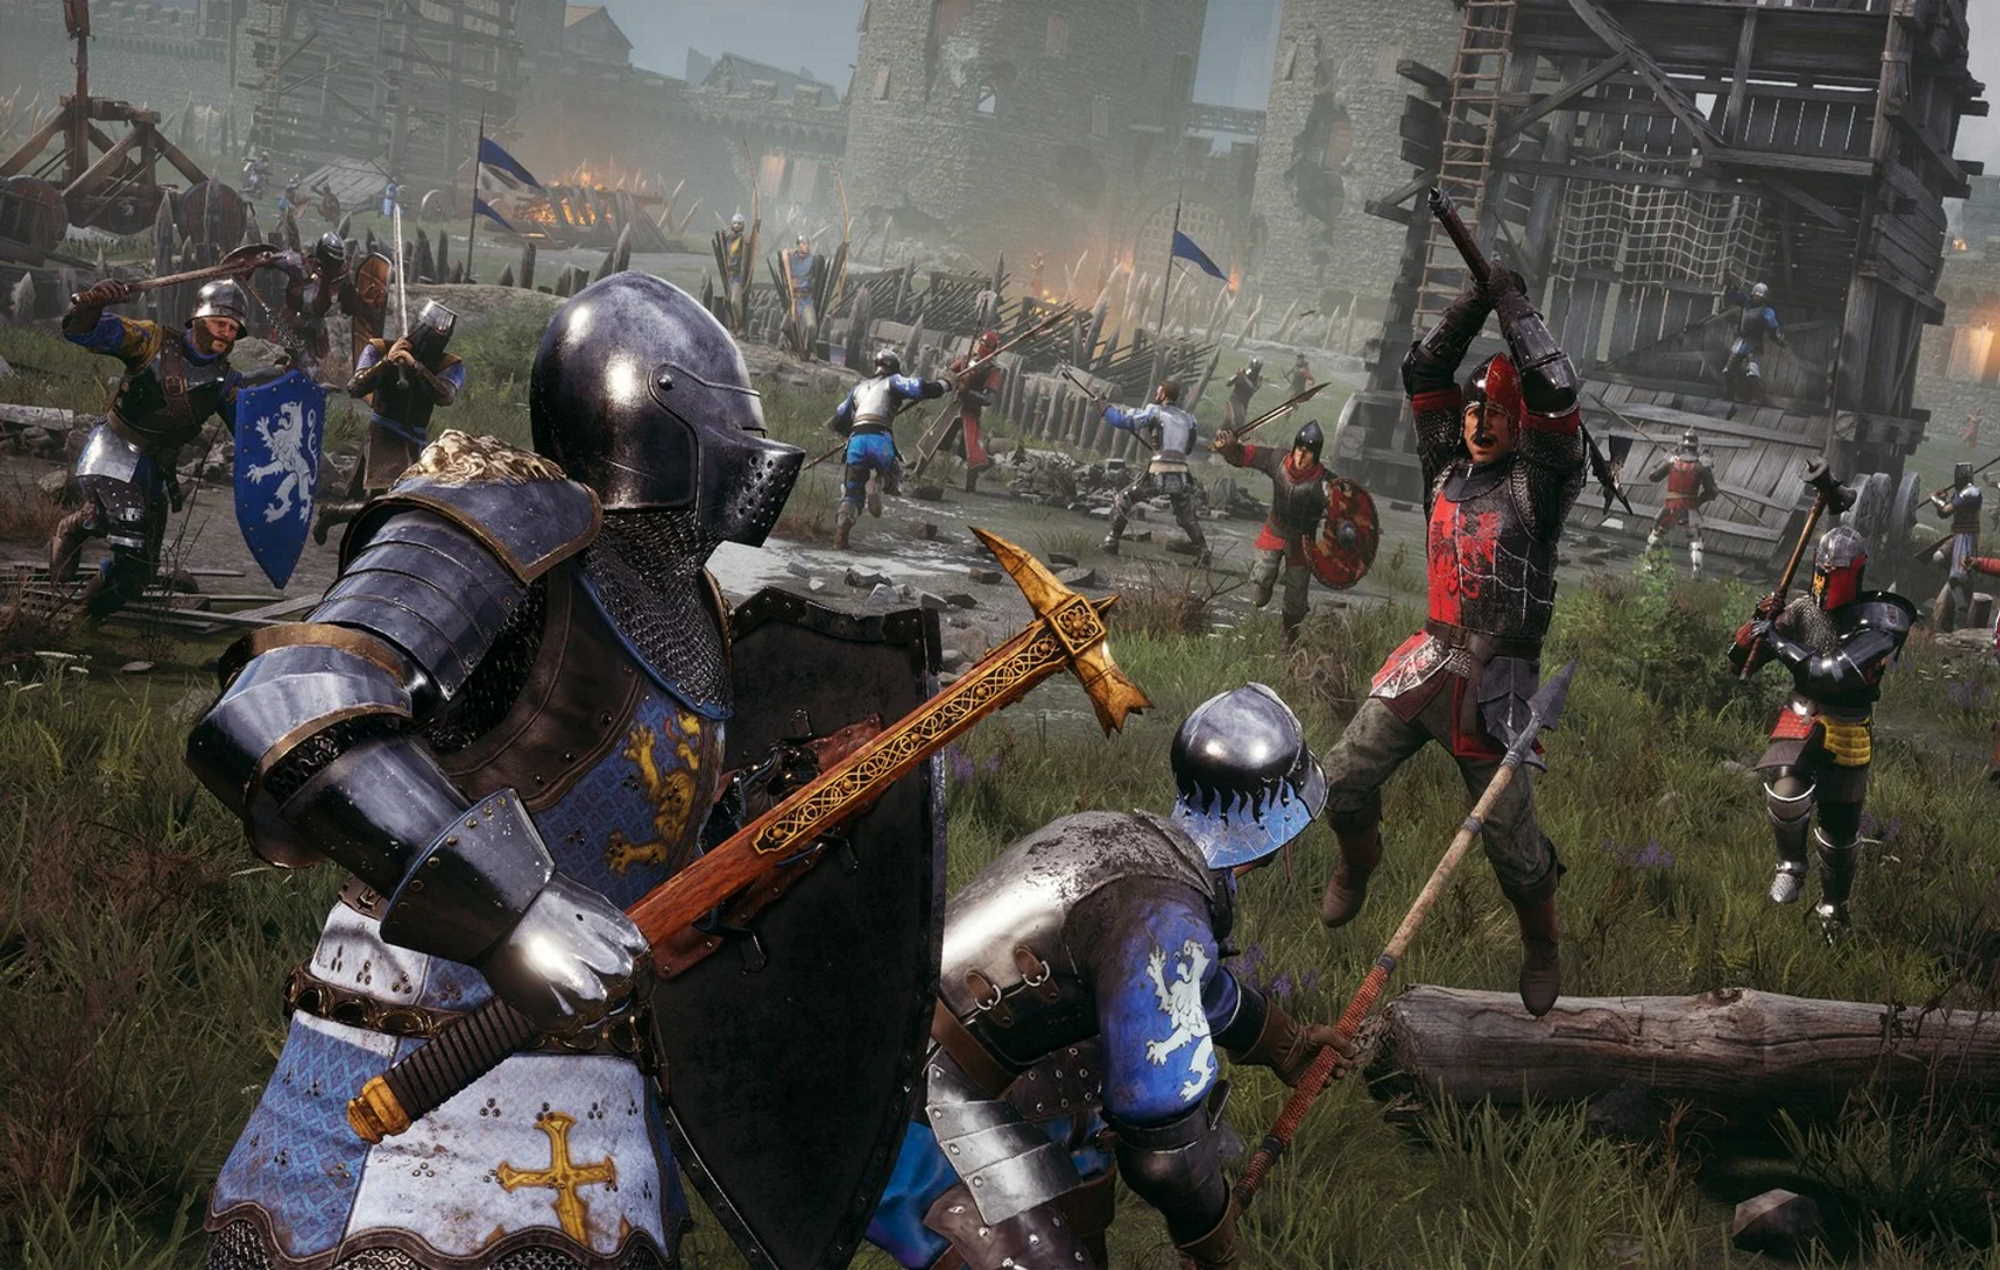 Chivalry 2 has arrived on Steam!